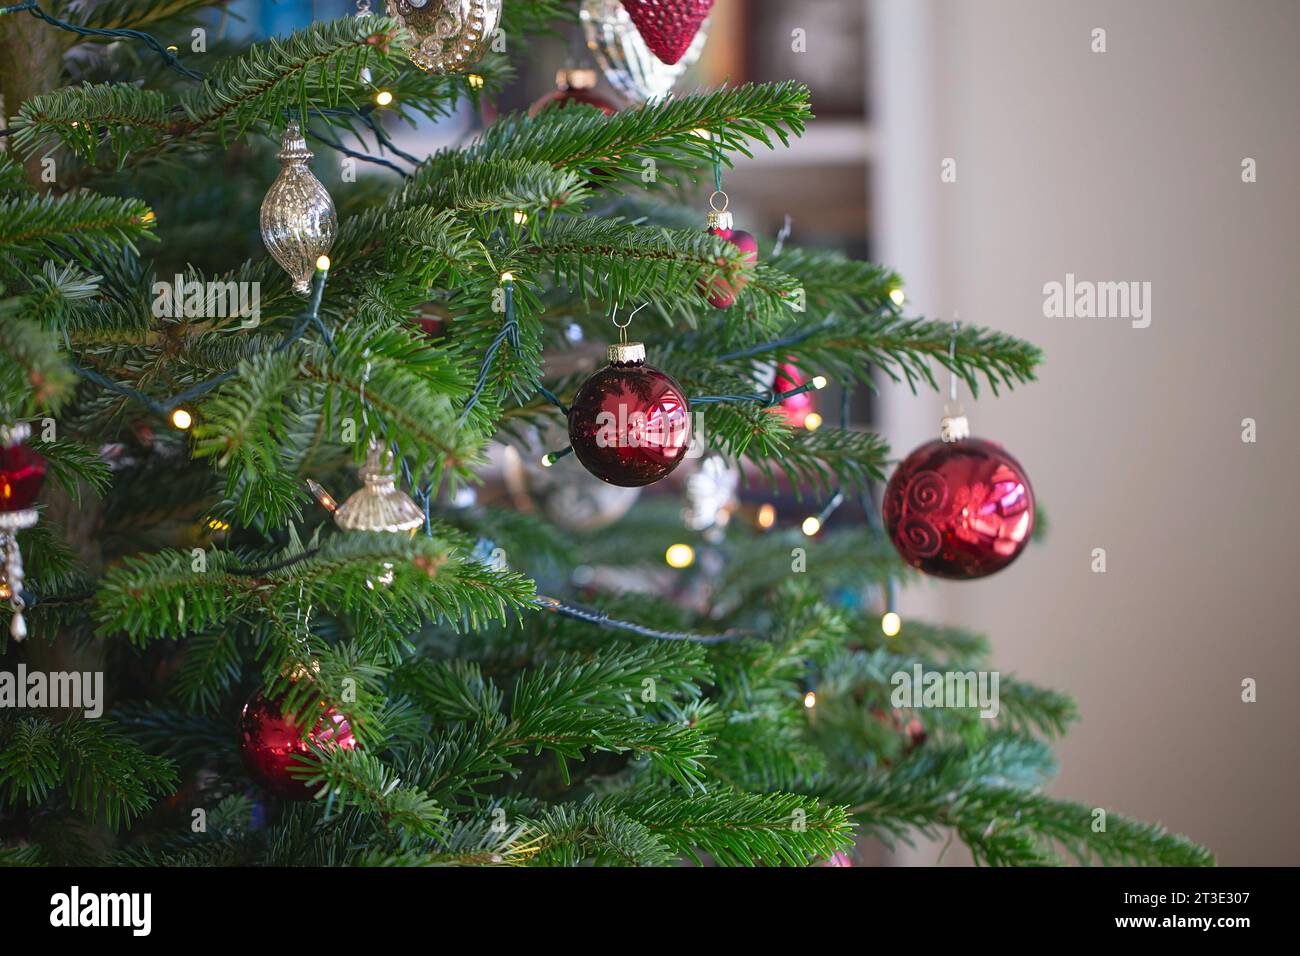 New year cozy home interior with Christmas tree and garlands. Christmas decoration in the house Stock Photo